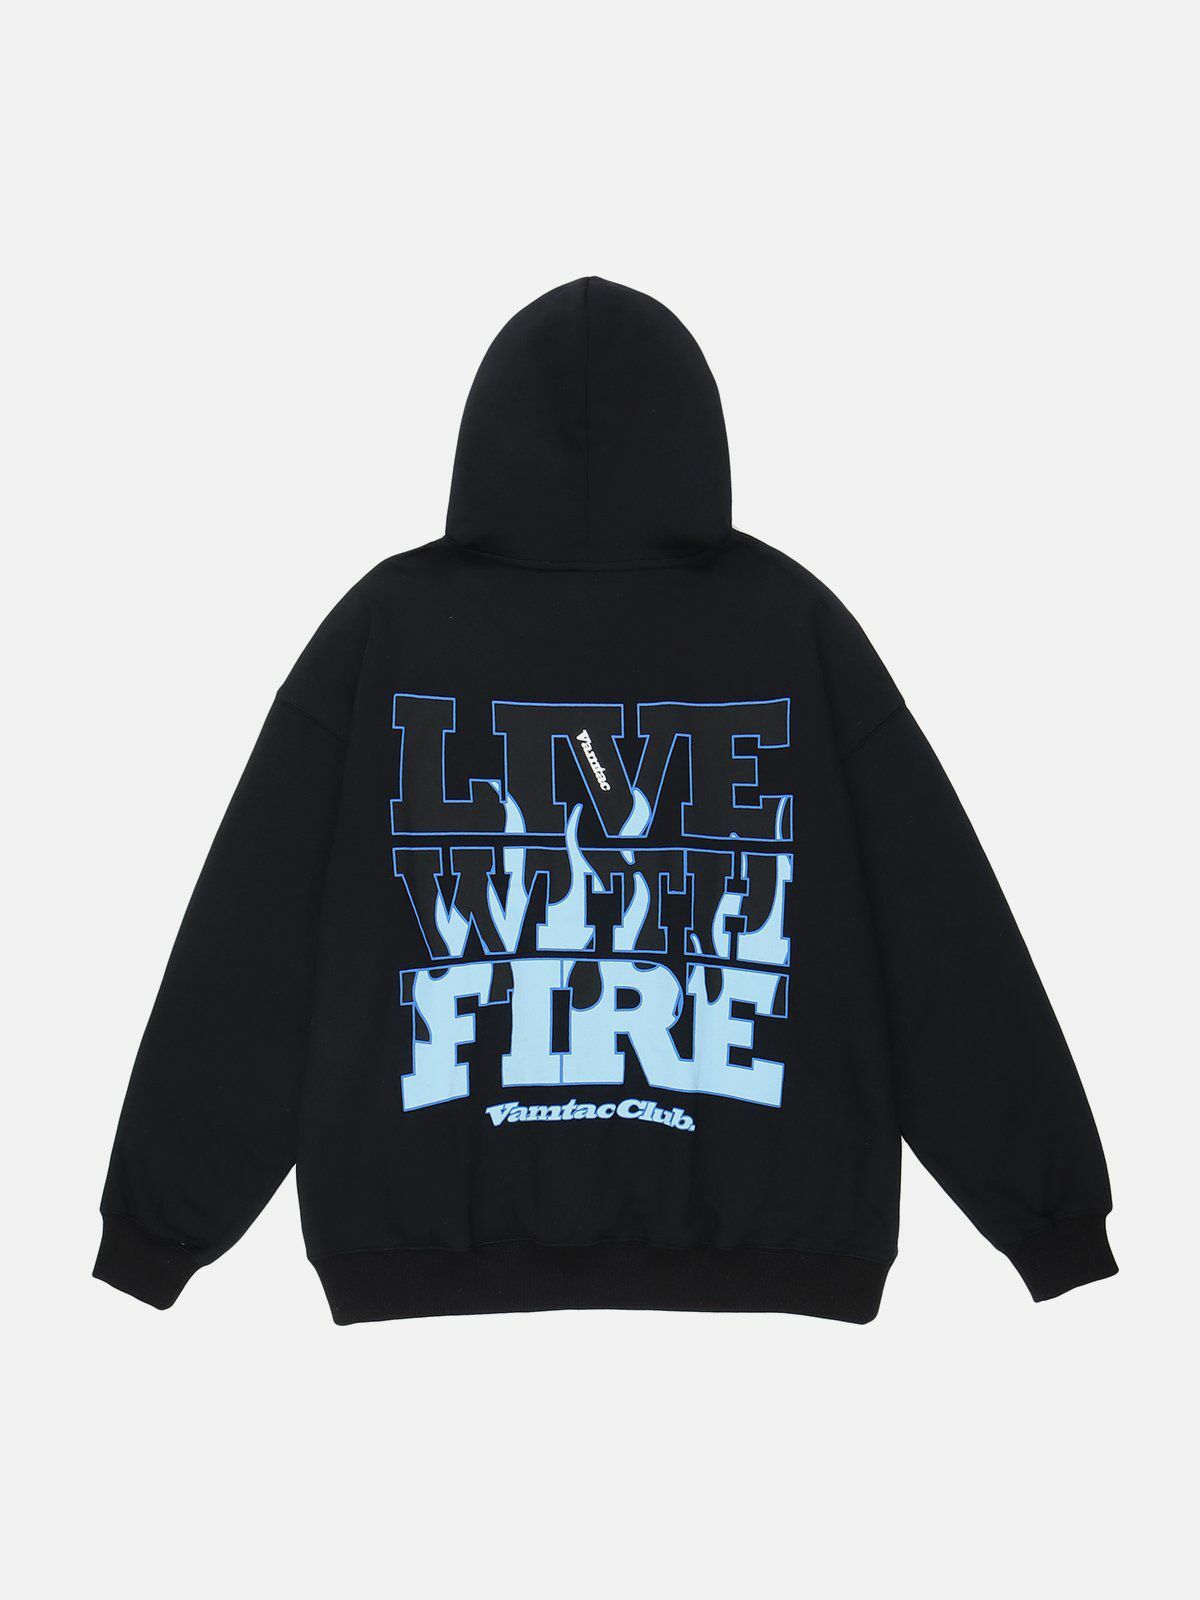 retro flame letters hoodie edgy streetwear statement 7783